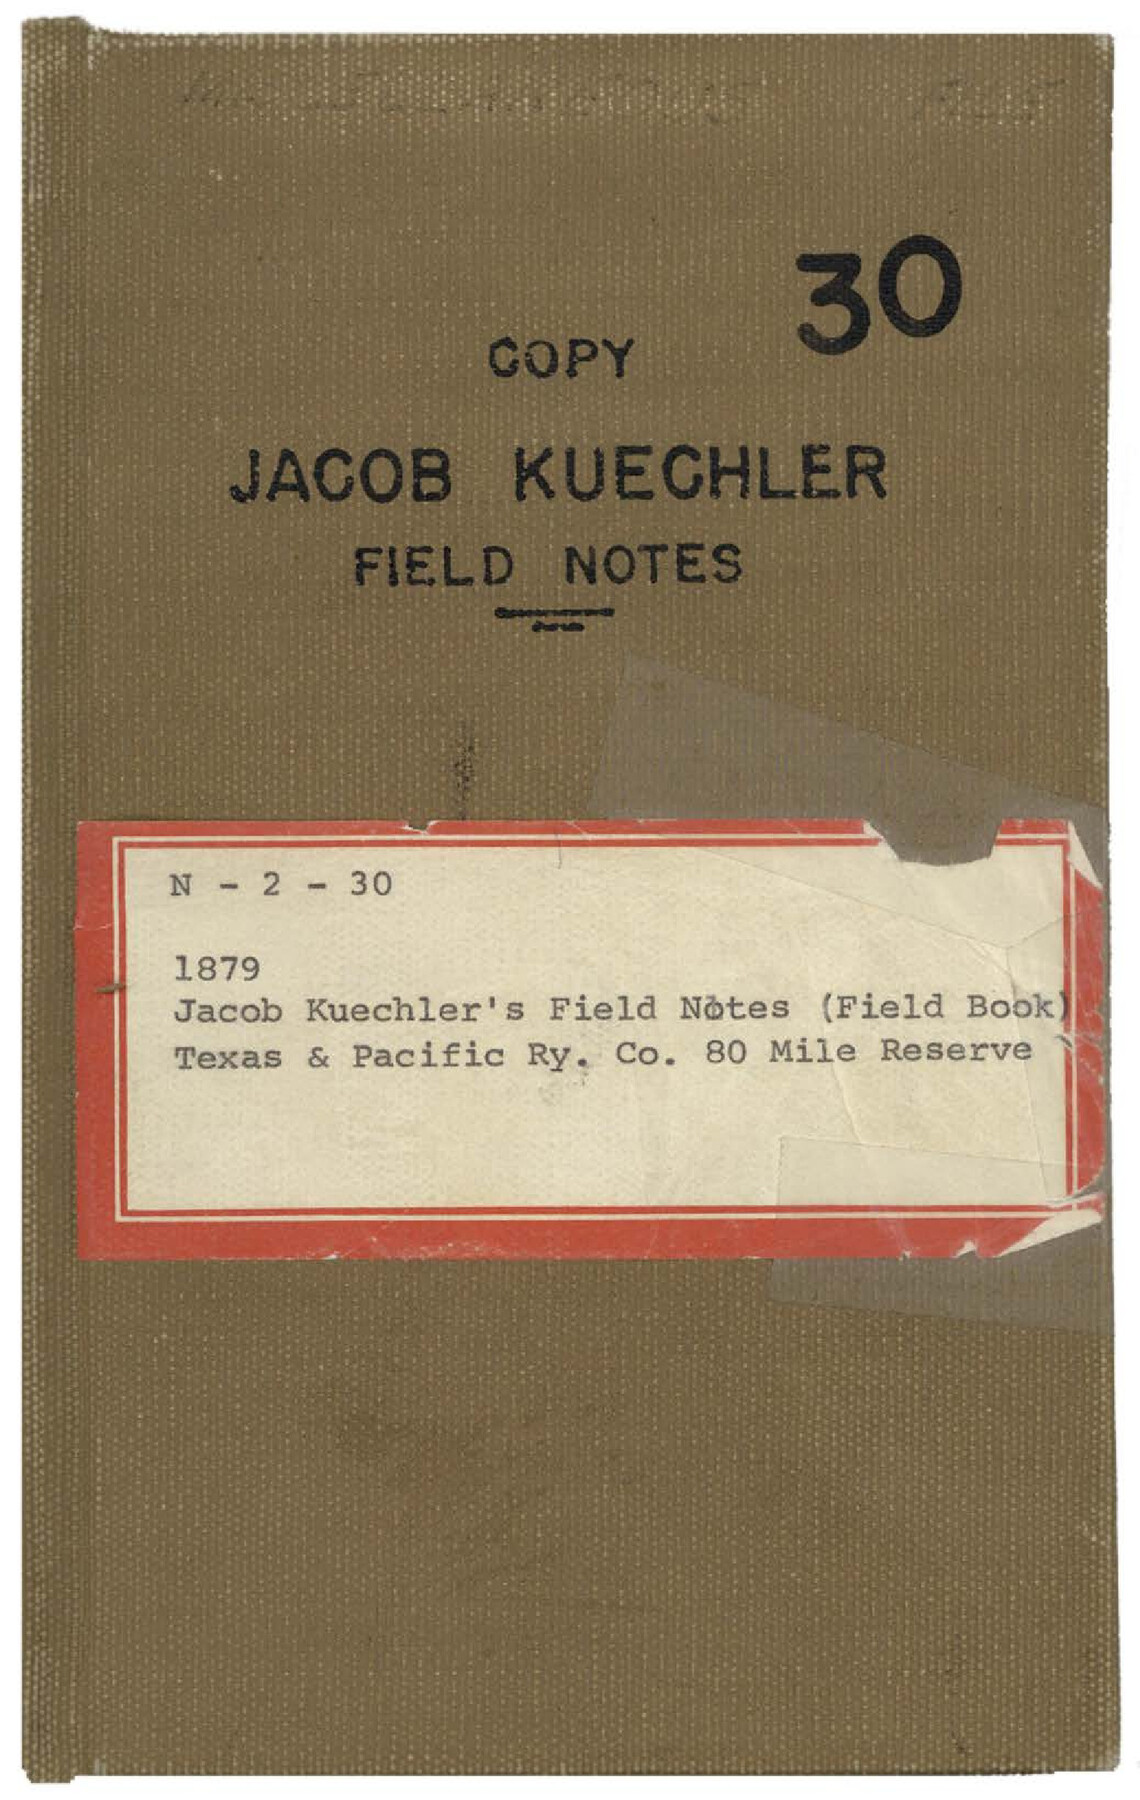 3050, Jacob Kuechler's Field Notes (Field Book), Texas & Pacific Ry. Co. 80 Mile Reserve, General Map Collection